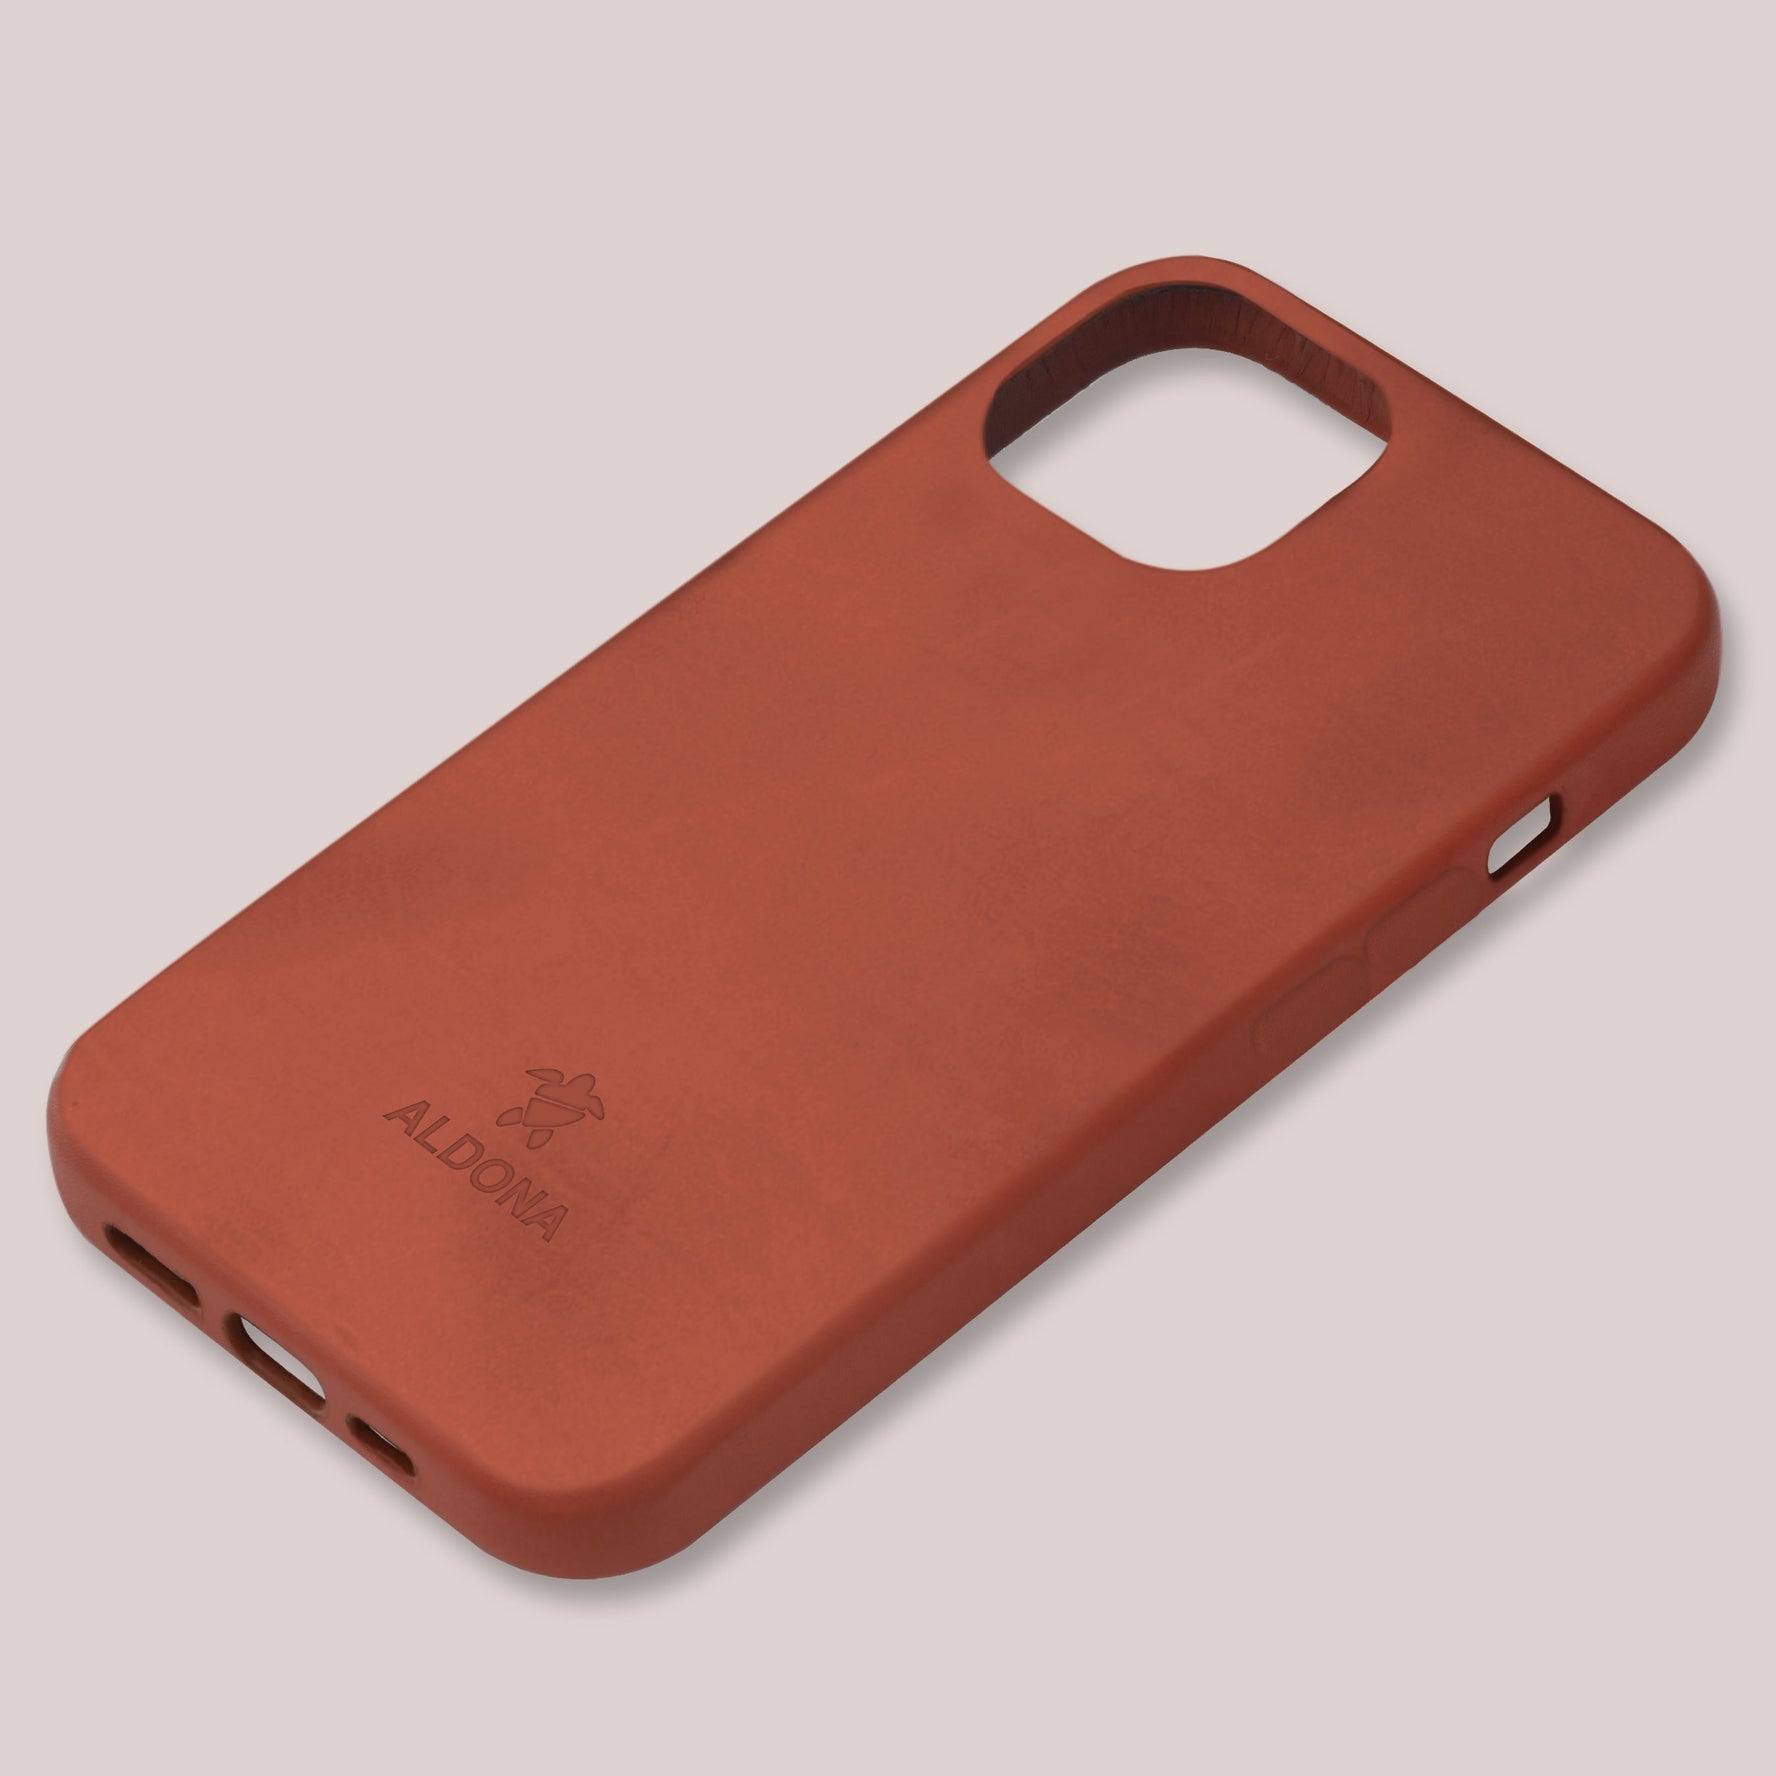 Kalon Case for iPhone 14 with MagSafe Compatibility - Cognac